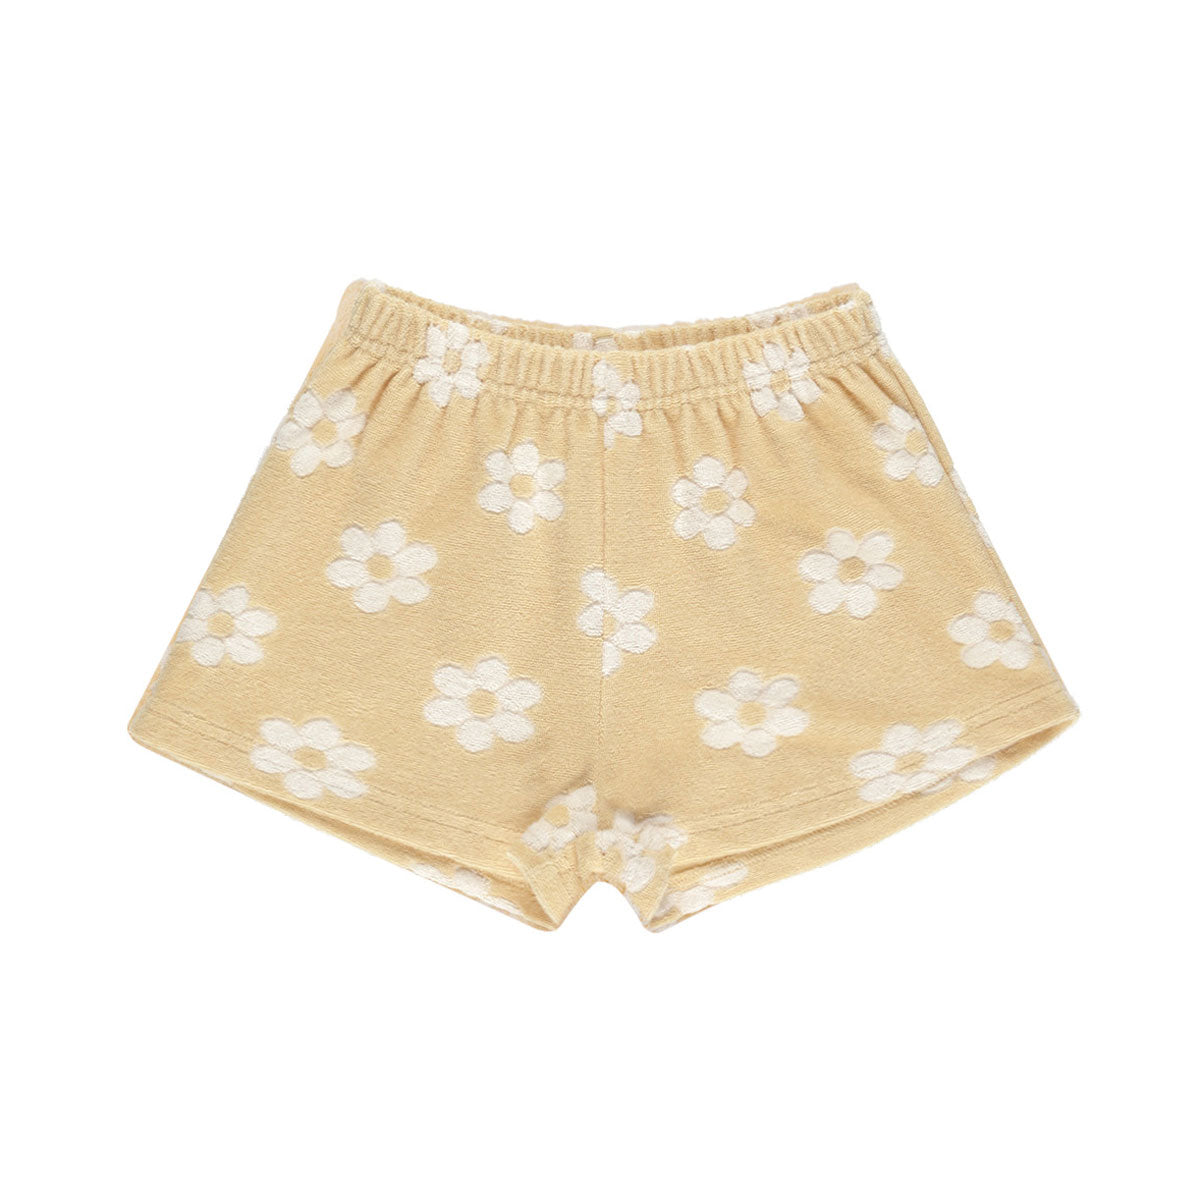 Rylee and Cru Track Short - Daisy - Yellow